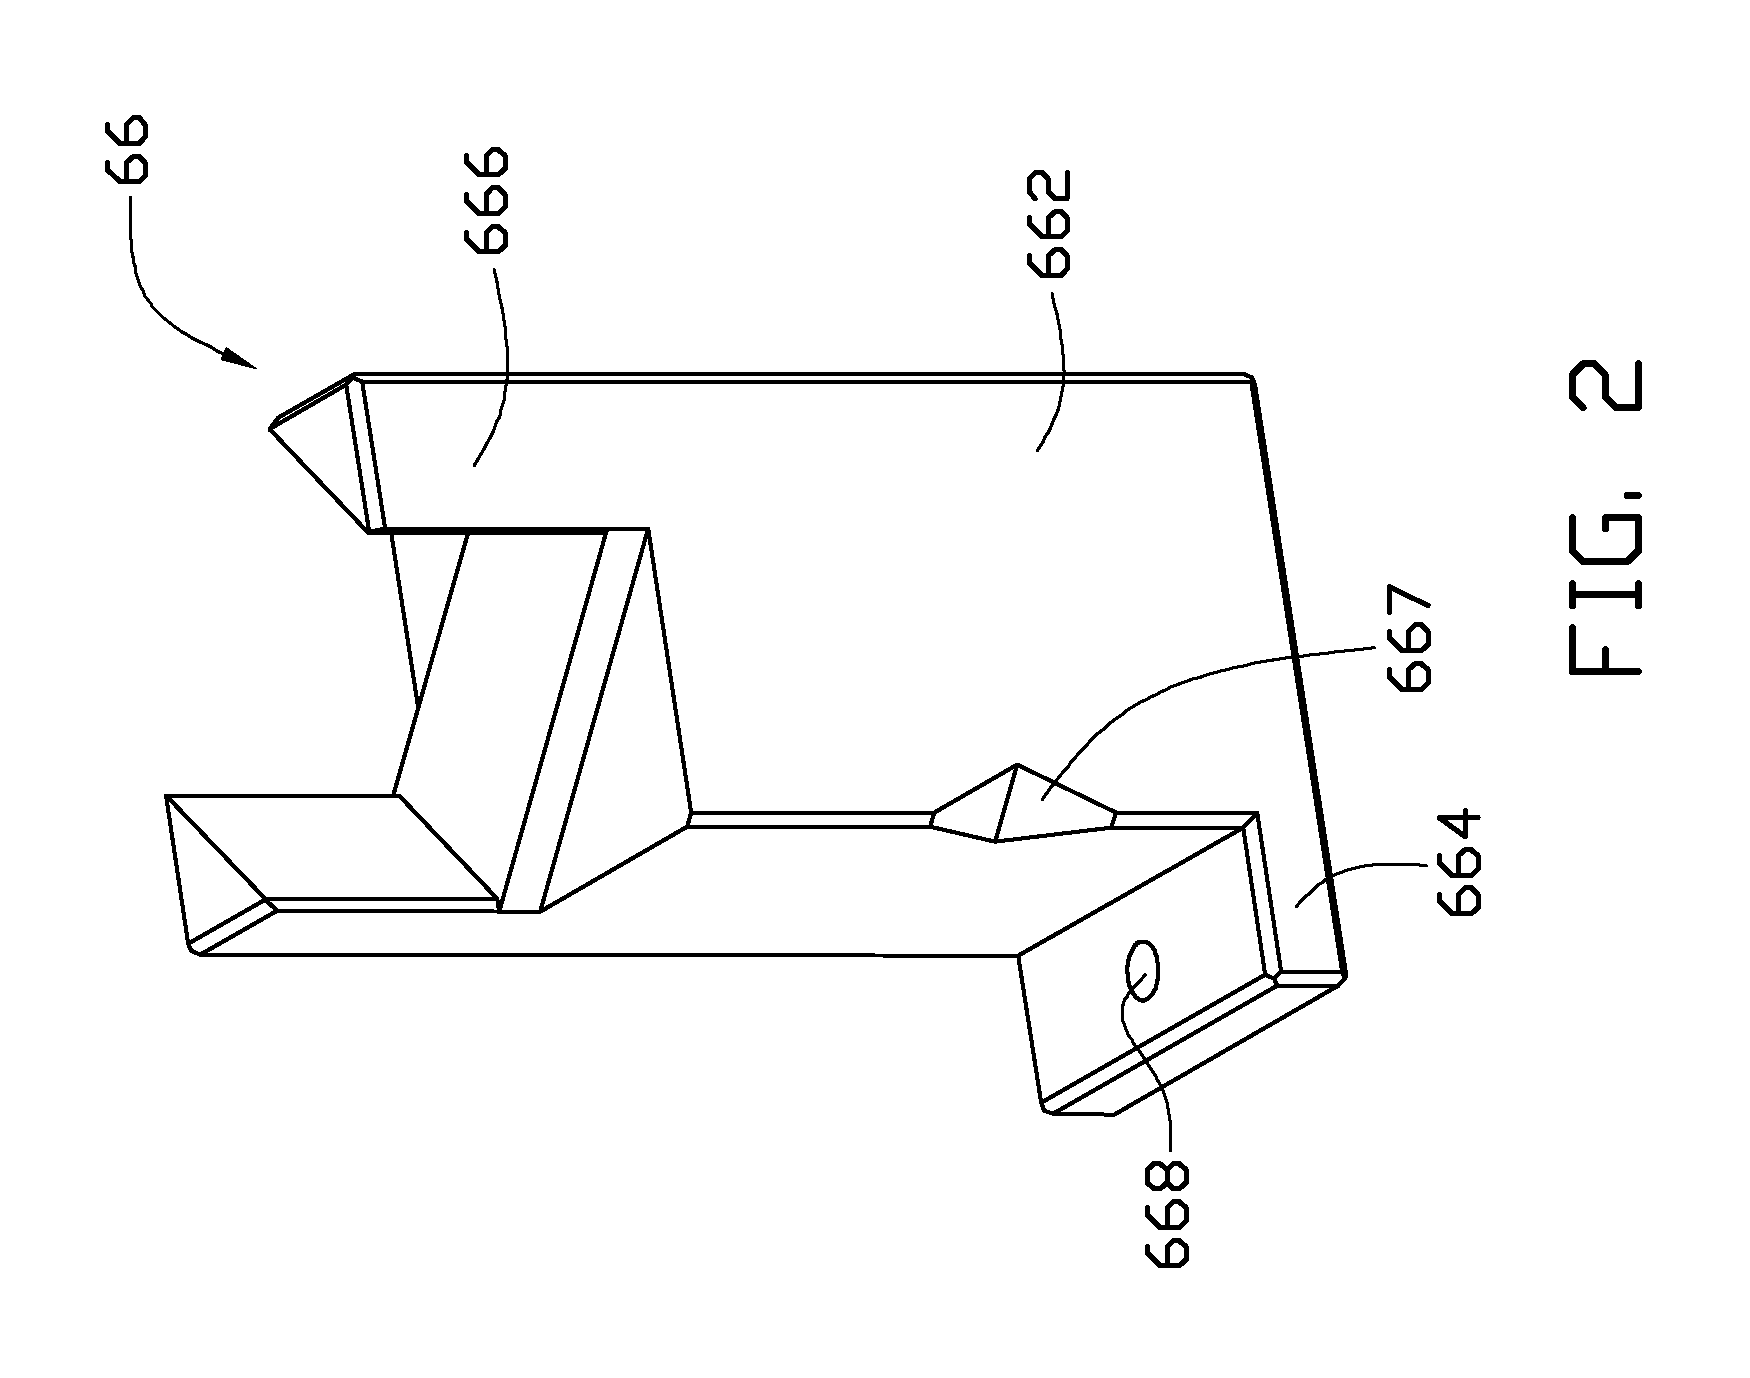 Apparatus for testing object strength